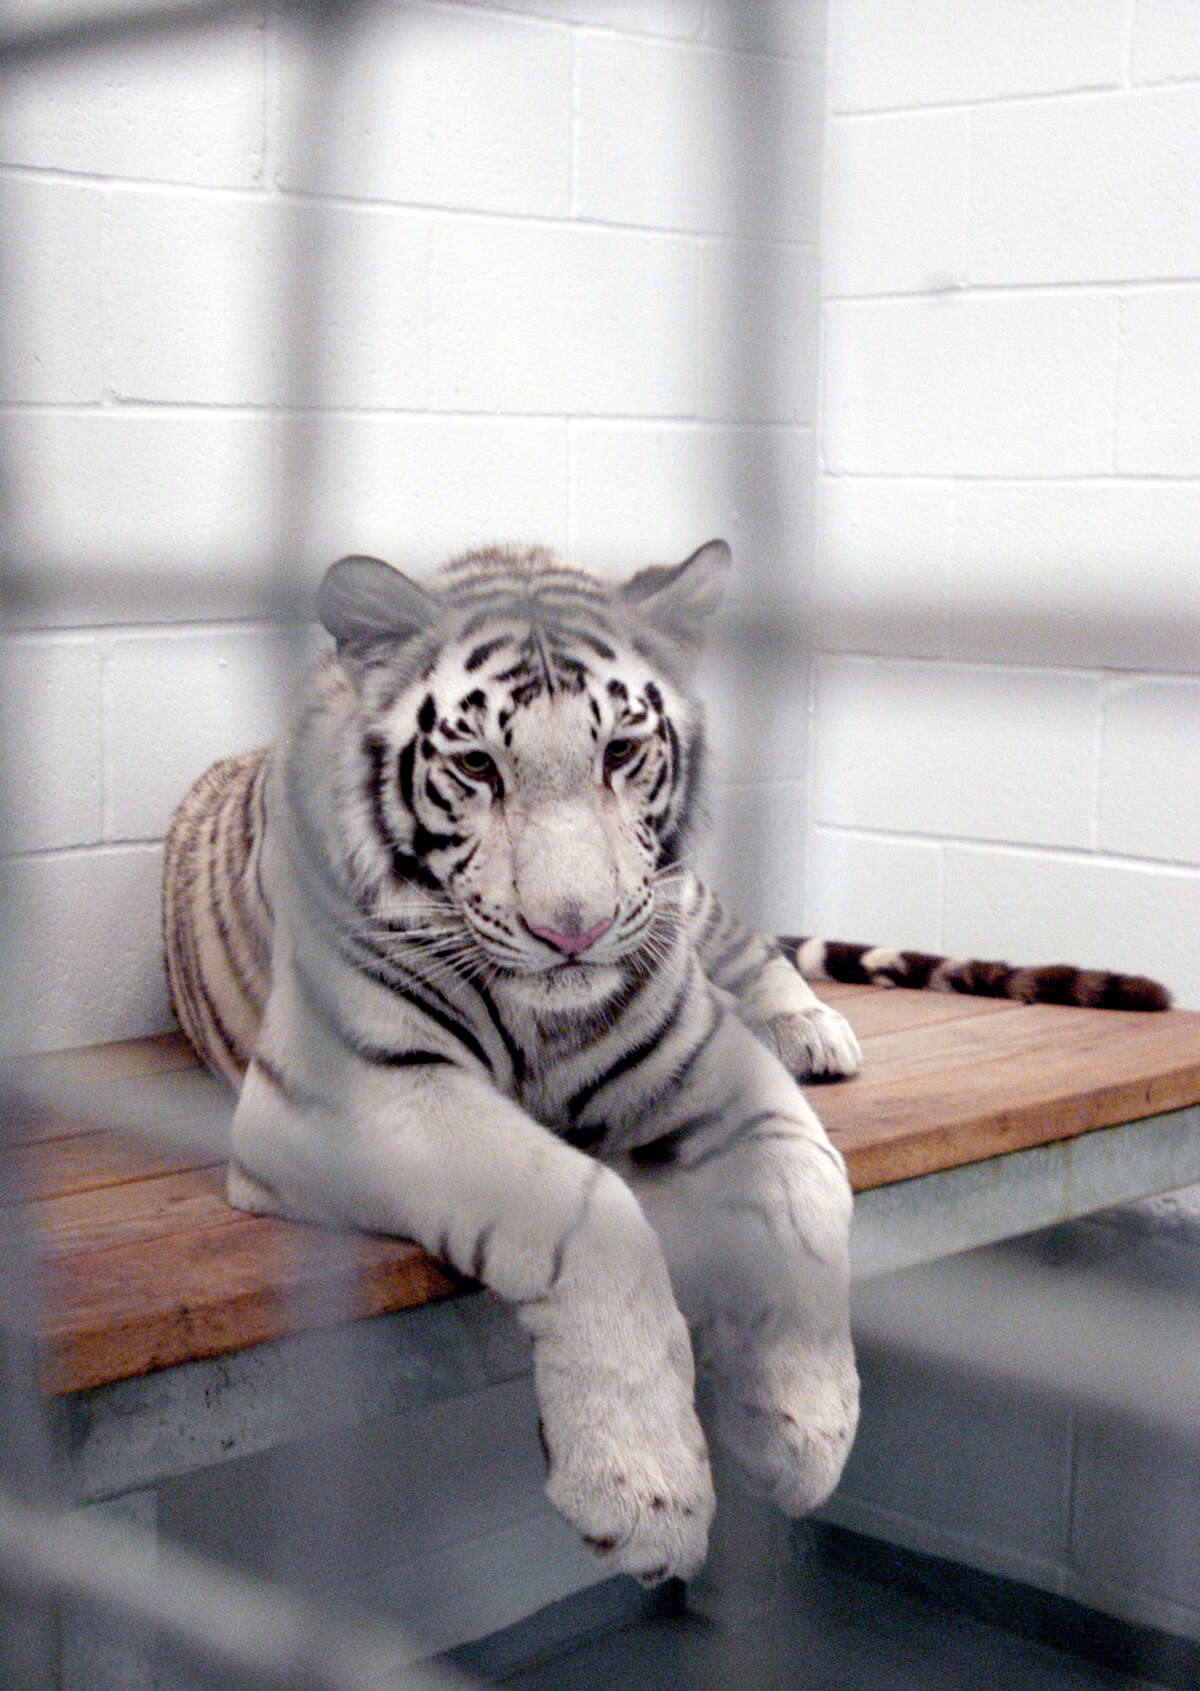 A Harris County judge has dismissed a lawsuit filed by Landry's Inc. against an animal rights organization that alleged four white tigers at the Downtown Aquarium were kept in living conditions that were inadequate.